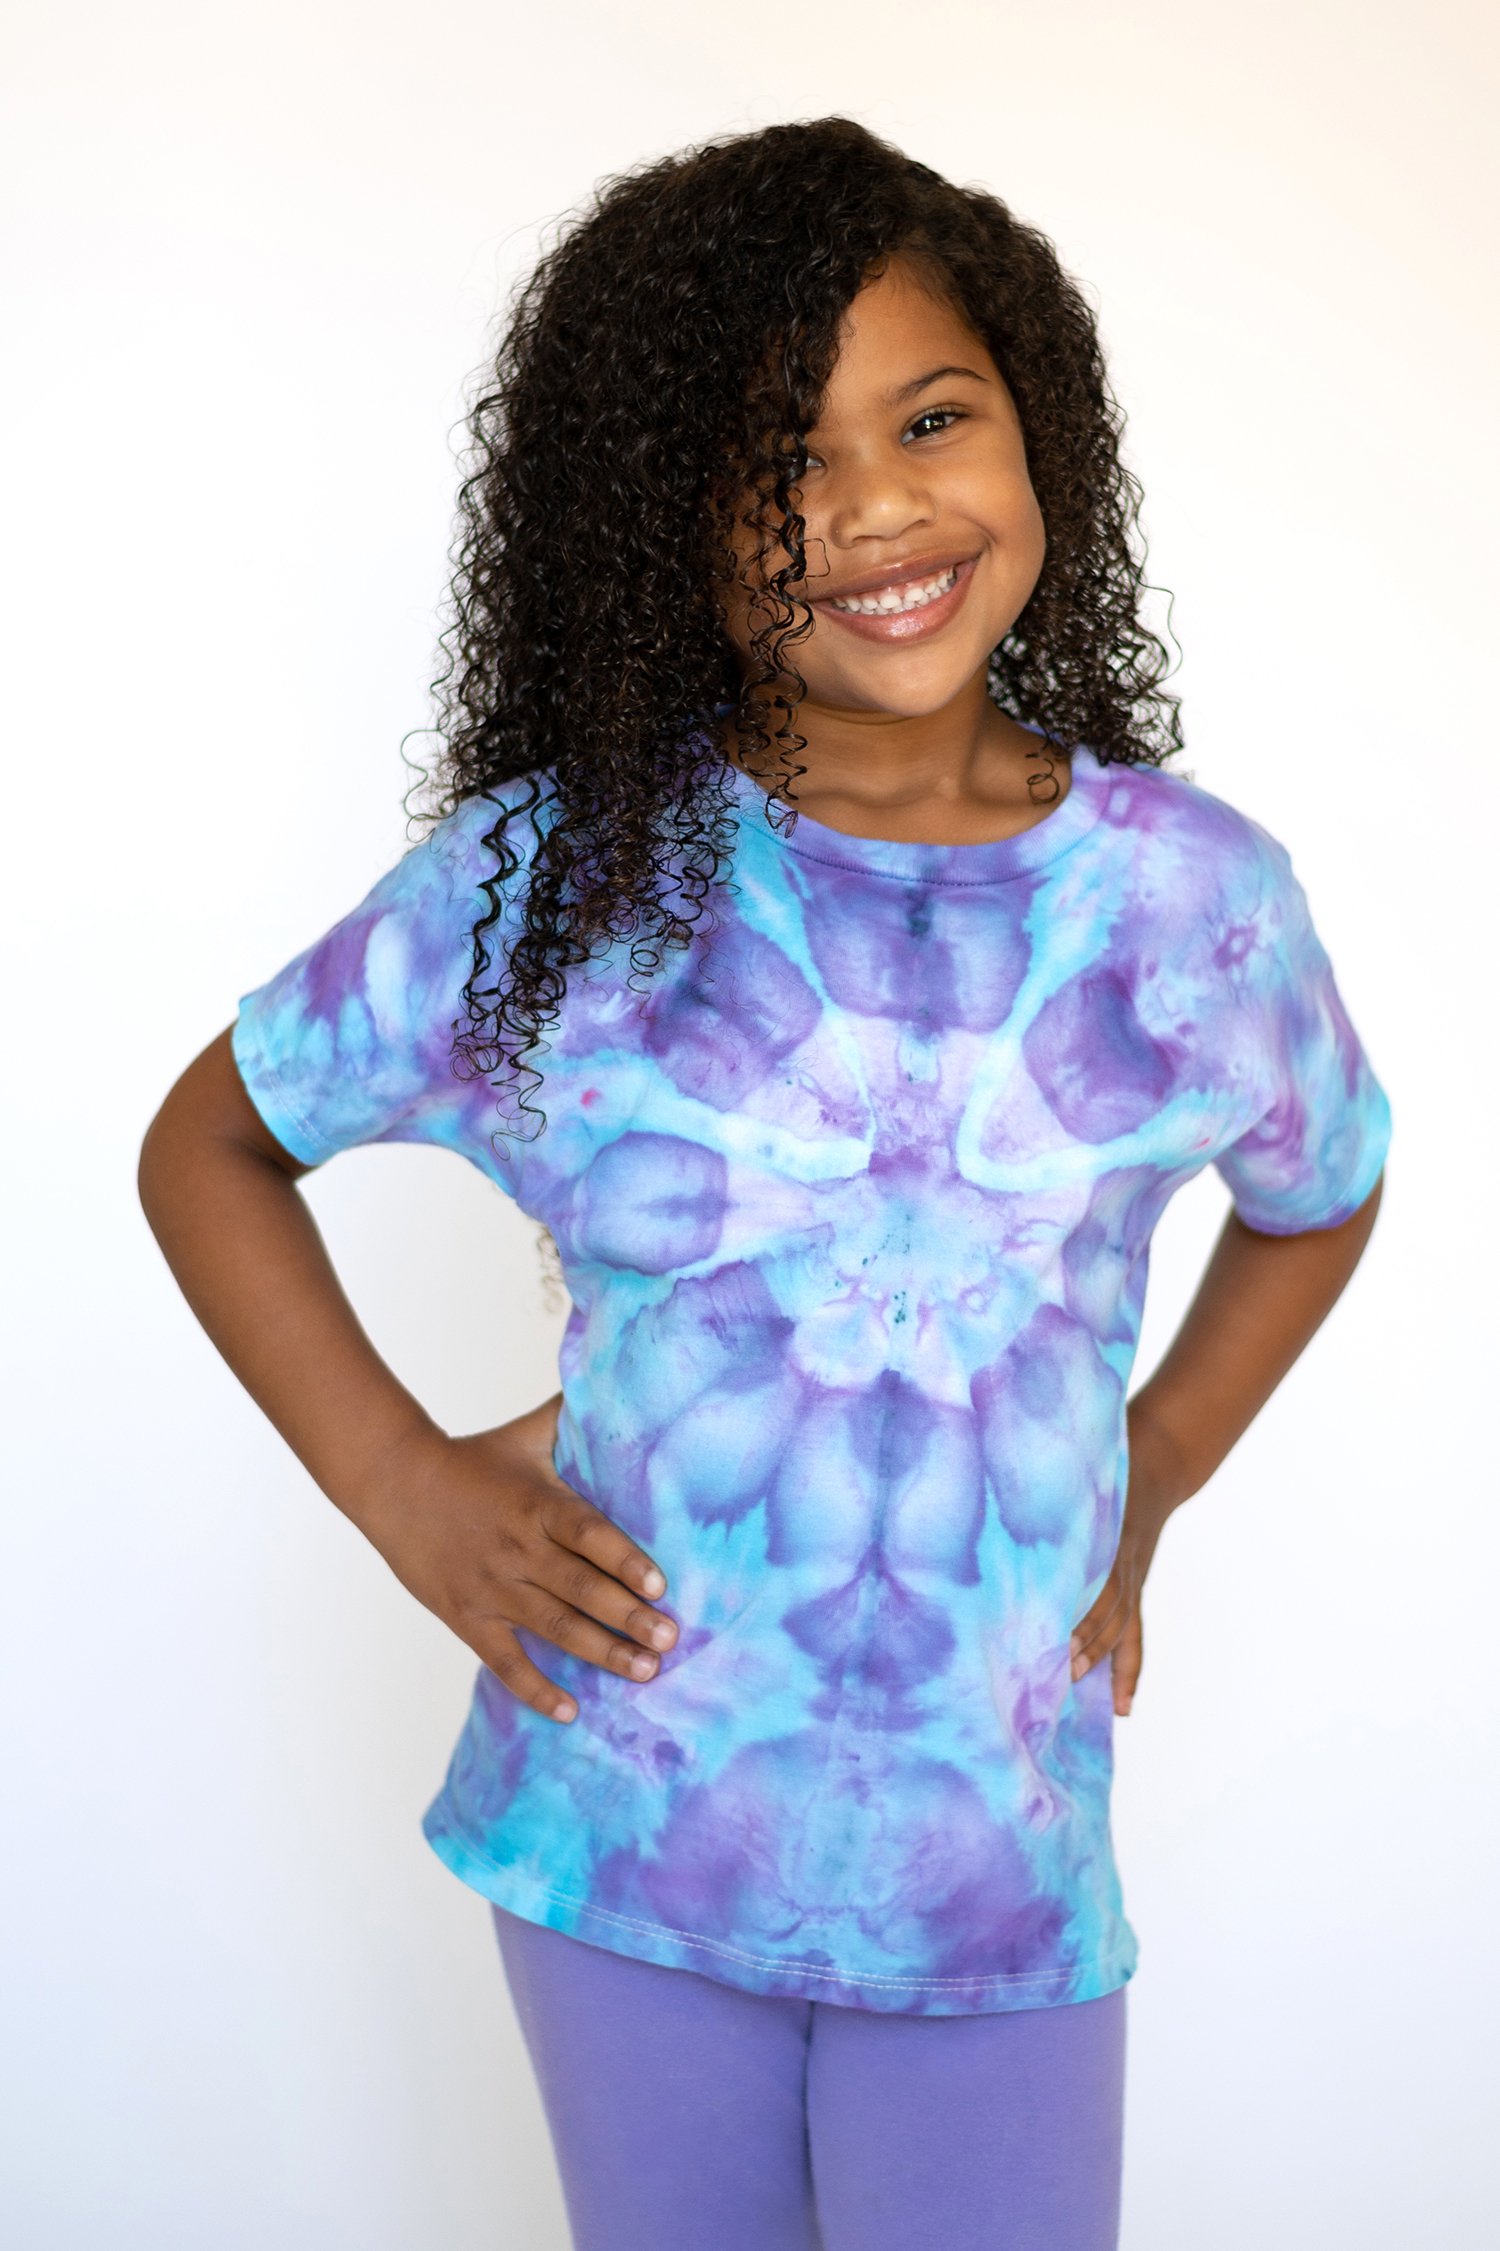 Cute smiling young Black girl with curly hair wearing a purple and blue ice dyed t-shirt 